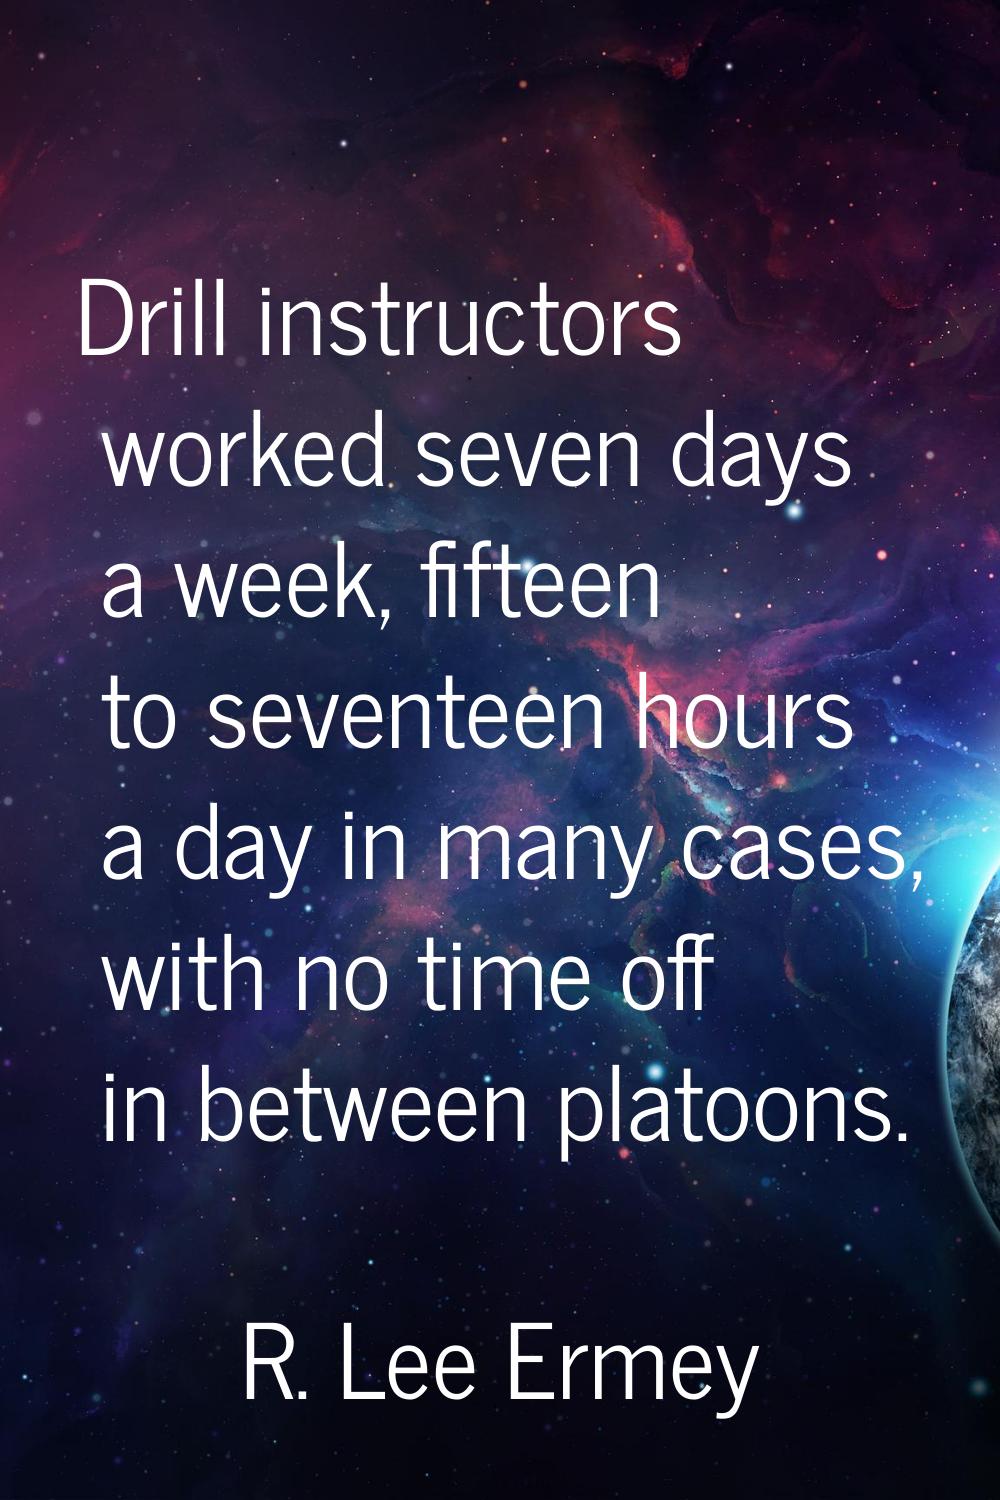 Drill instructors worked seven days a week, fifteen to seventeen hours a day in many cases, with no